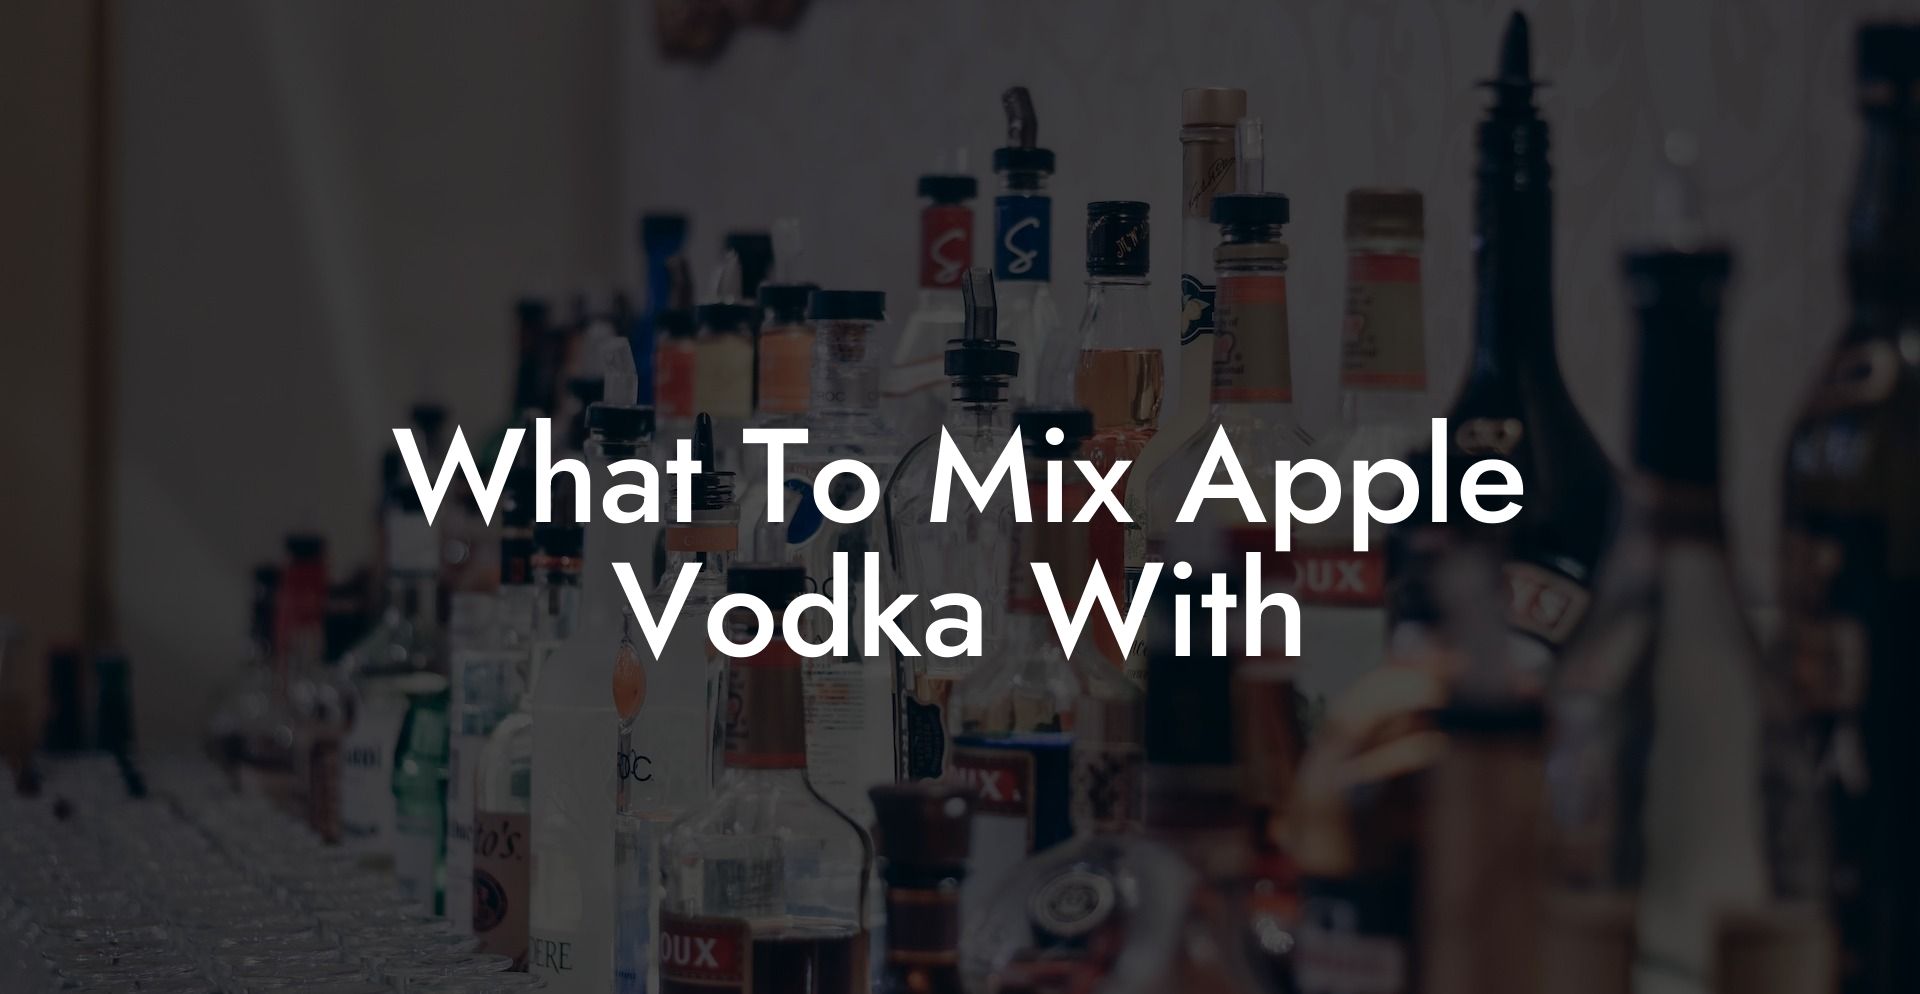 What To Mix Apple Vodka With